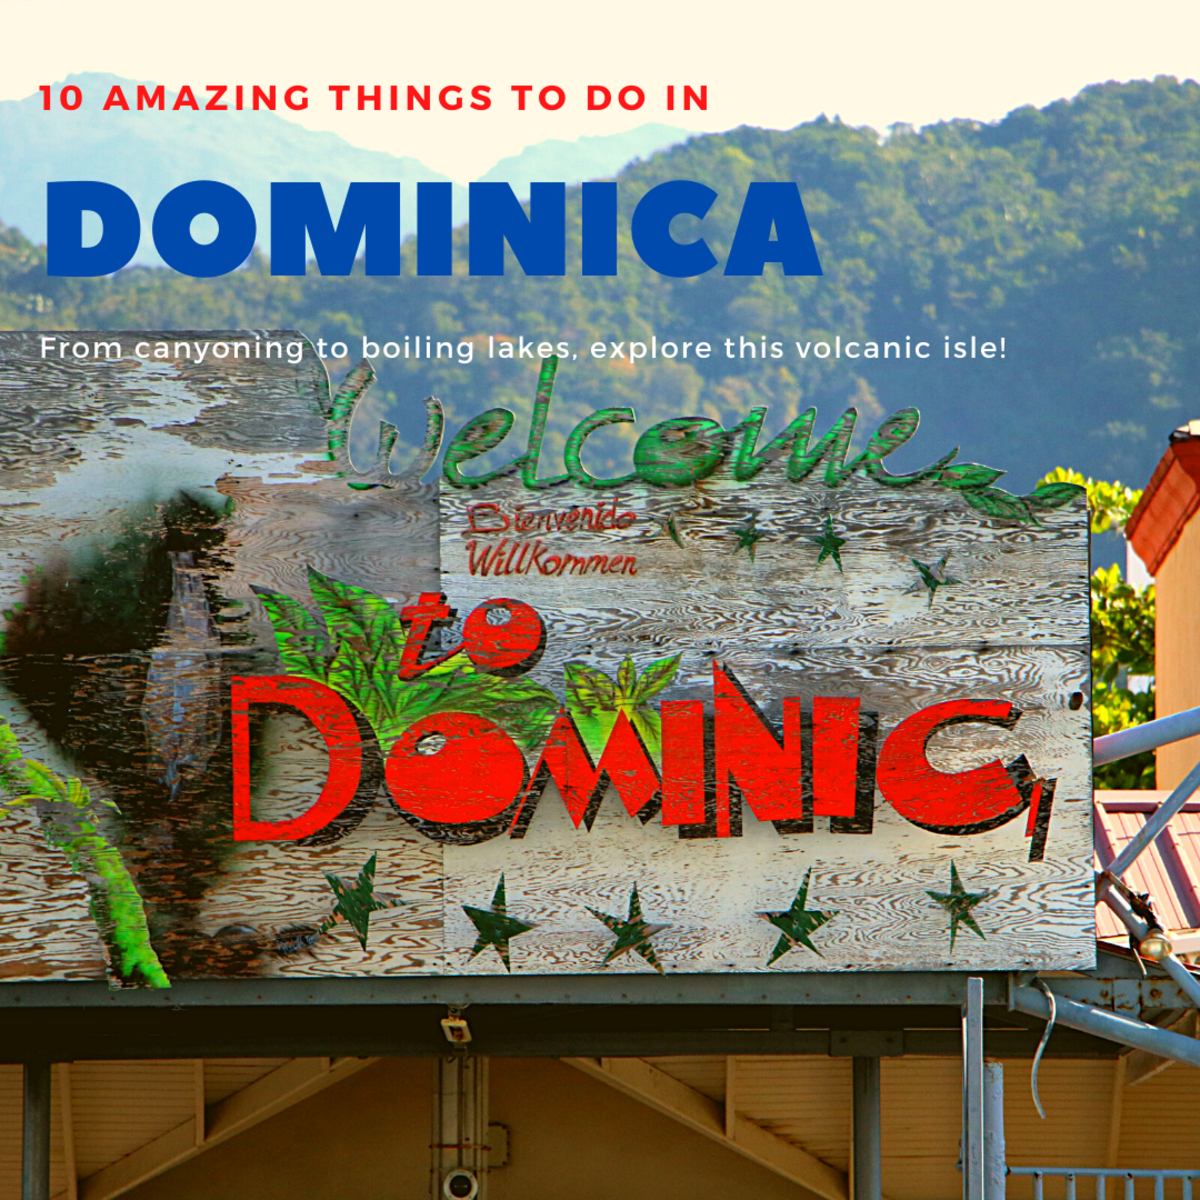 Dominica is perfect for adventure-seeking travelers, with activities ranging from hiking to a boiling lake to canyoning.